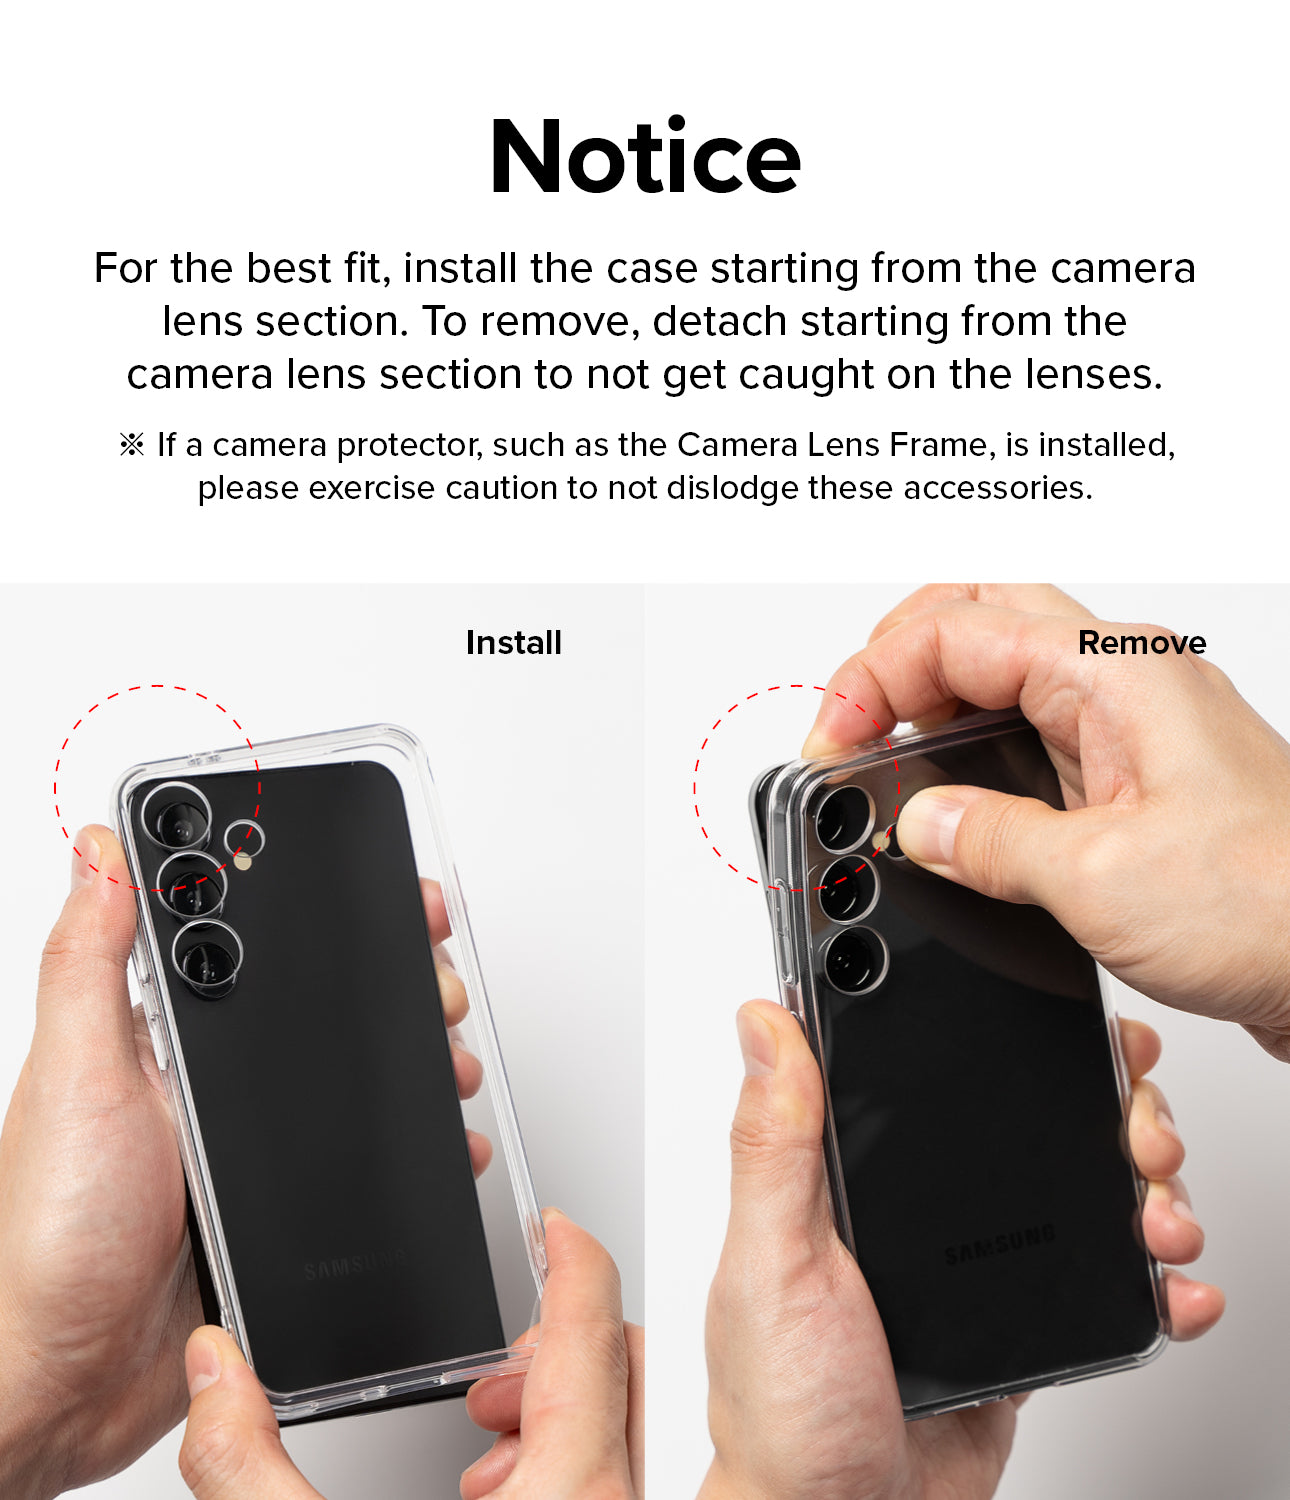 Galaxy A35 Case | Fusion Card - Notice. For the best fit, install the case starting from the camera lens section. To remove, detach starting from the camera lens section to not get caught on the lenses.